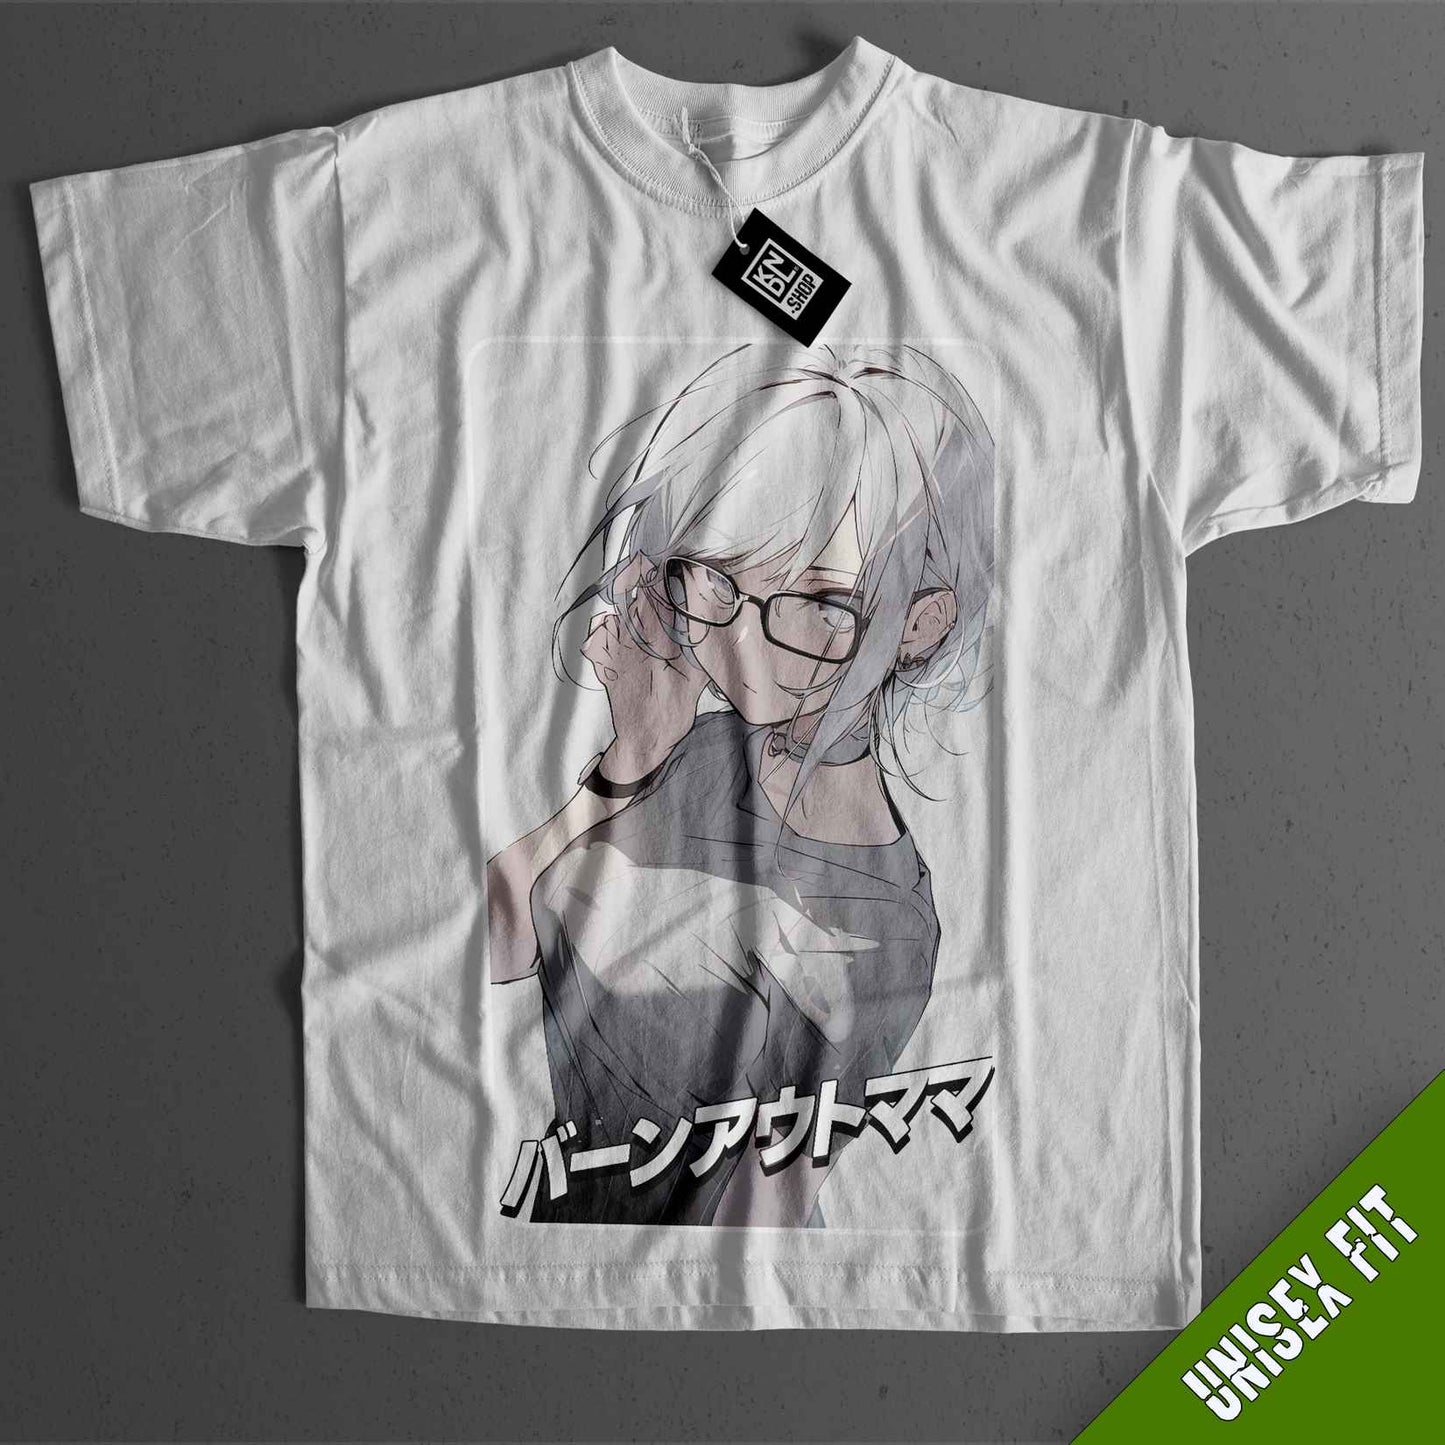 a t - shirt with an anime character on it